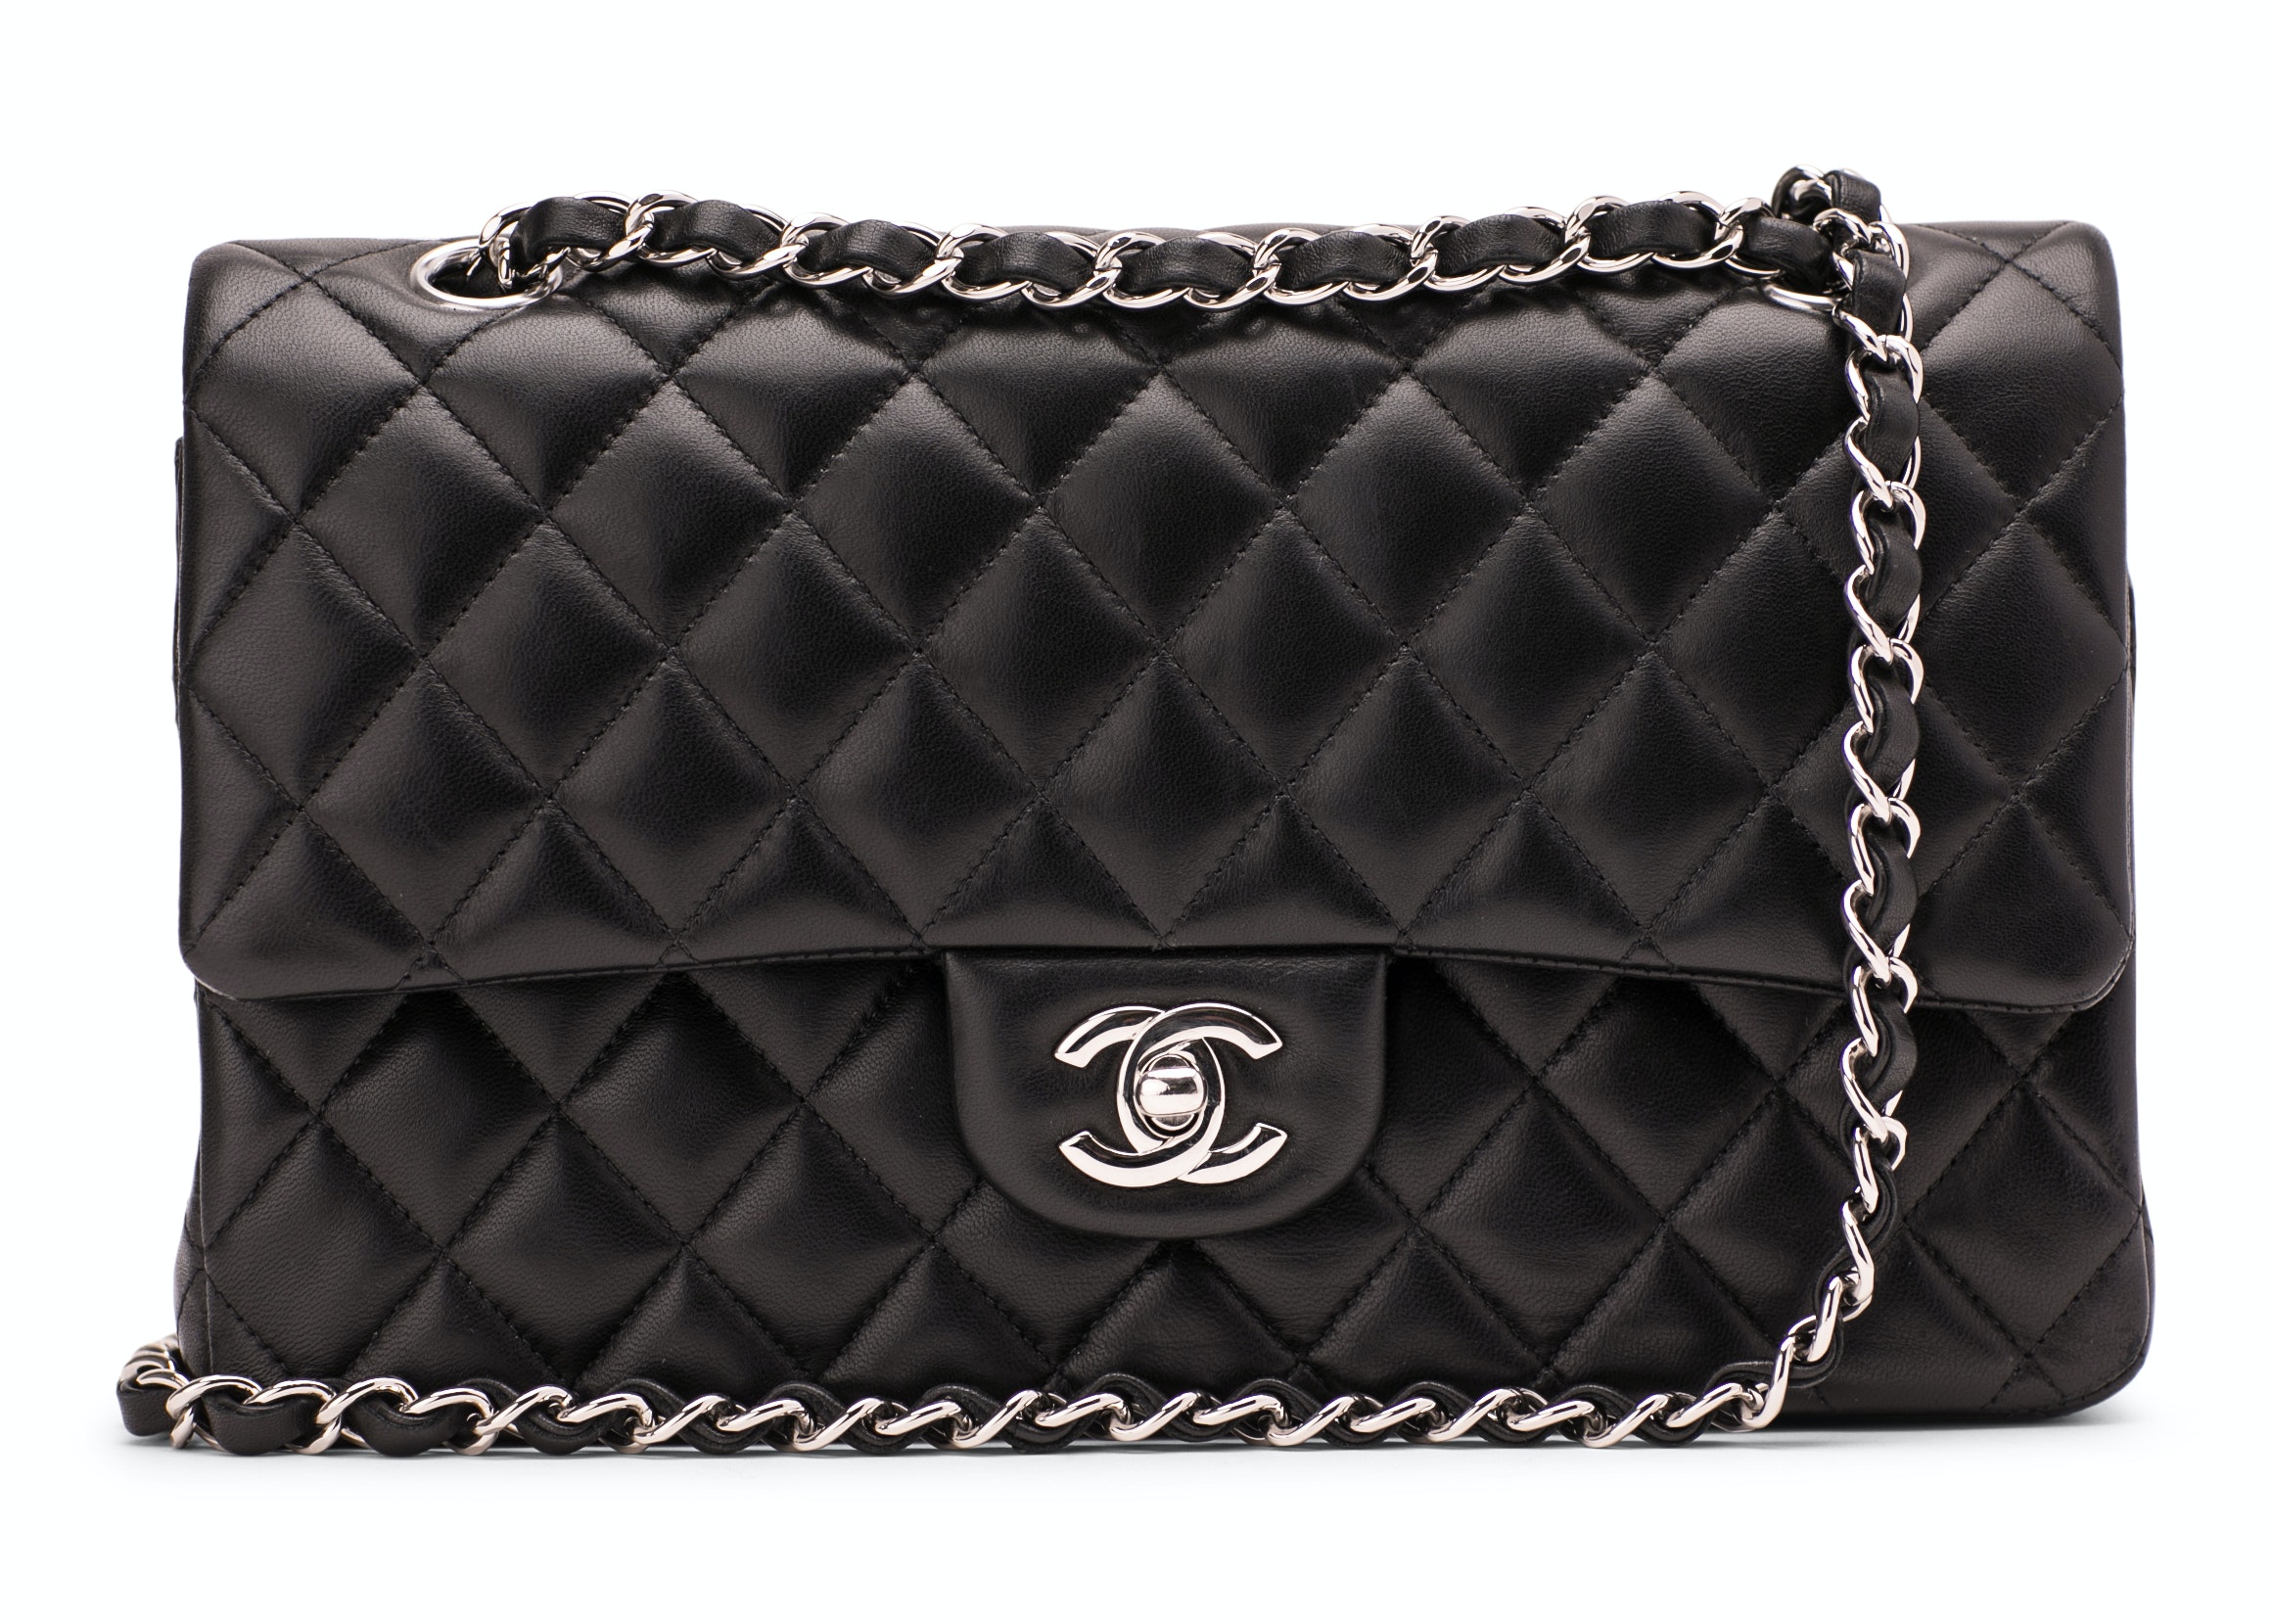 Chanel Cruise 2022 Runway Bag Collection featuring Classic Edgy  Spotted  Fashion